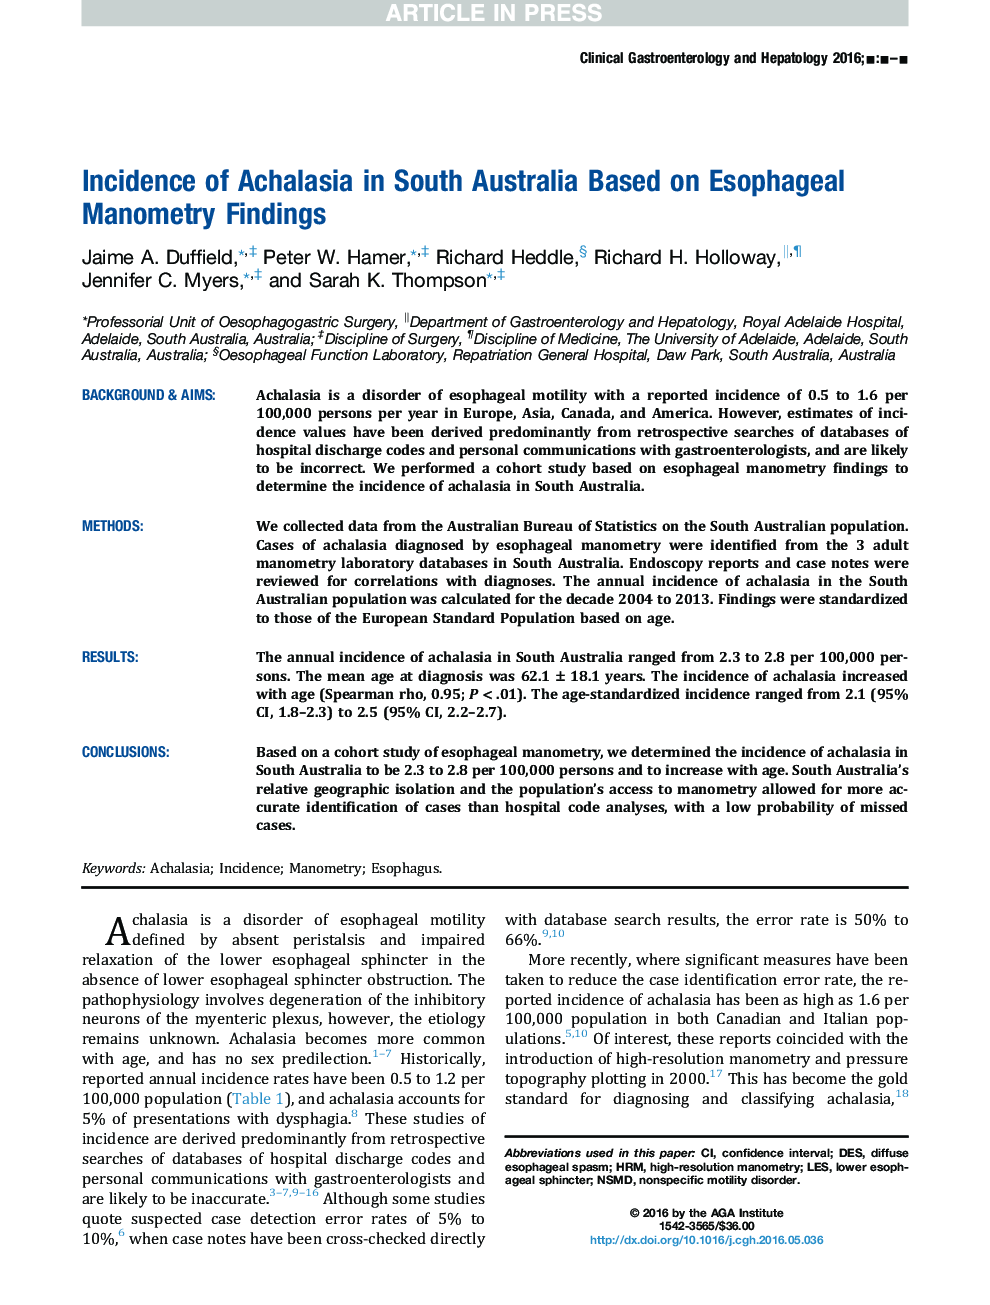 Incidence of Achalasia in South Australia Based on Esophageal Manometry Findings